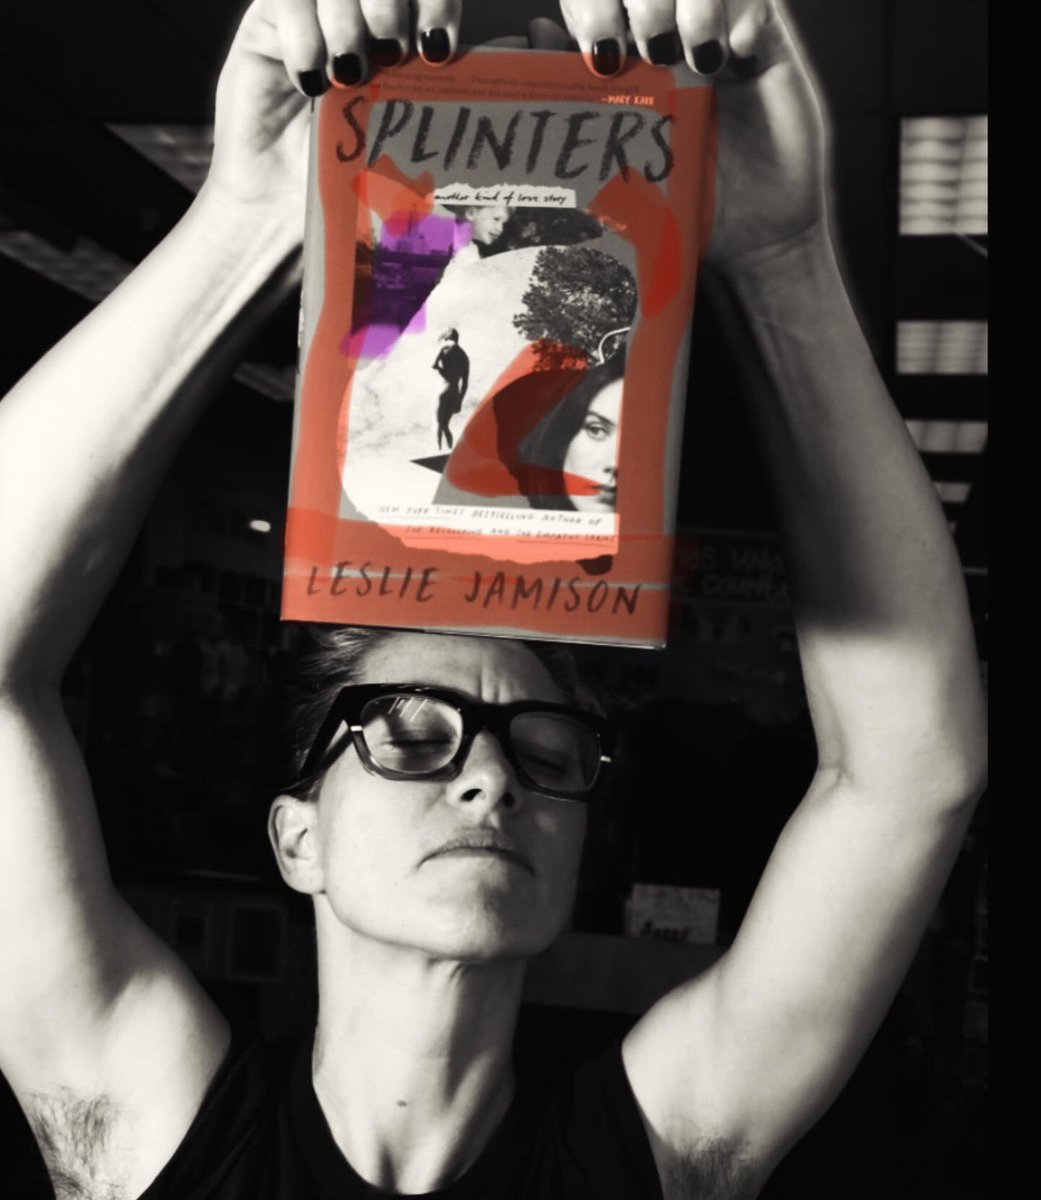 MEMOIR OF THE YEAR: “Splinters” Leslie Jamison’s writing is so honest it should be illegal. It is rare that I look forward so much to reading a book and am not only NOT disappointed, but floored by how phenomenal it is. Leslie and I will be in conversation Saturday, June 1st @